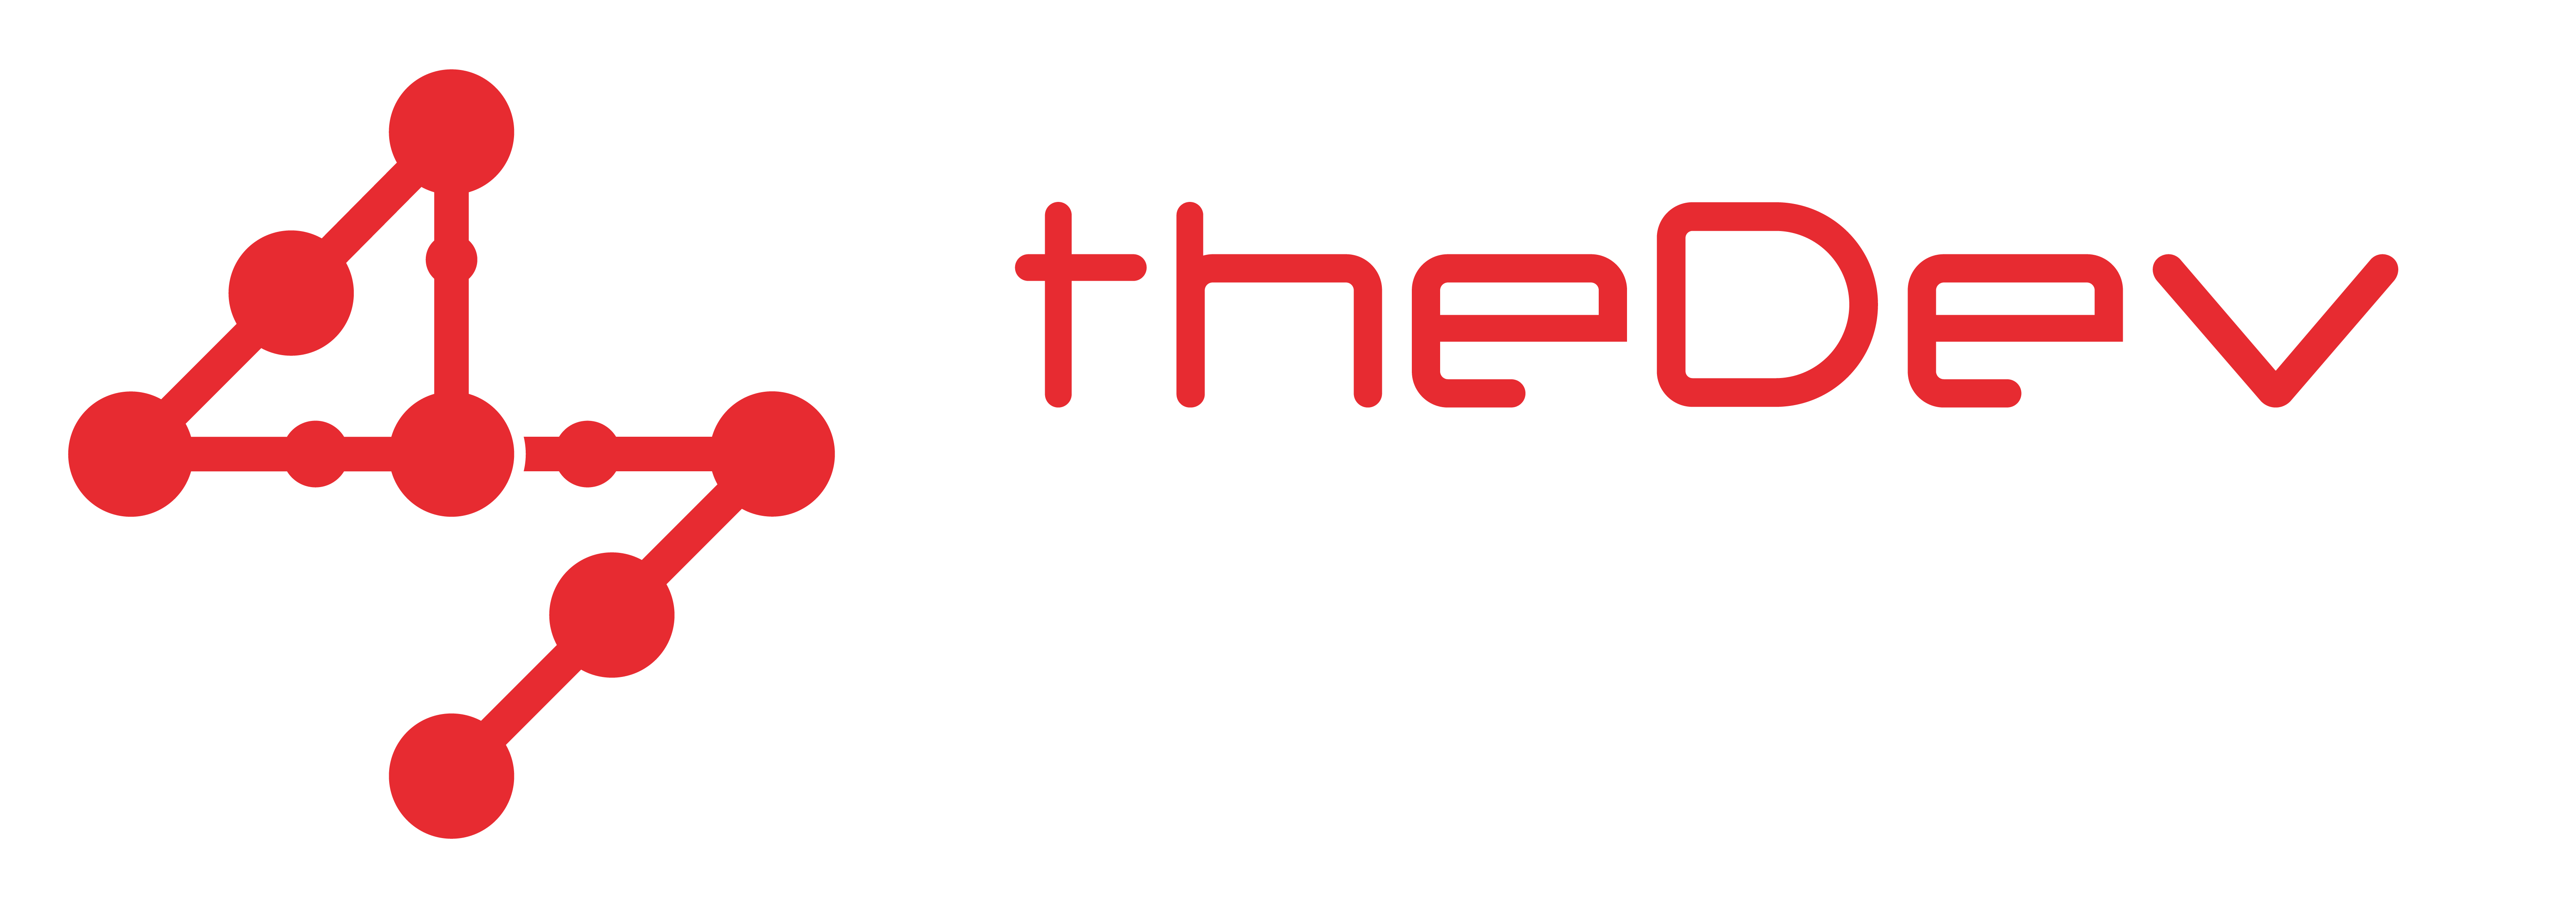 theDevMasters-1